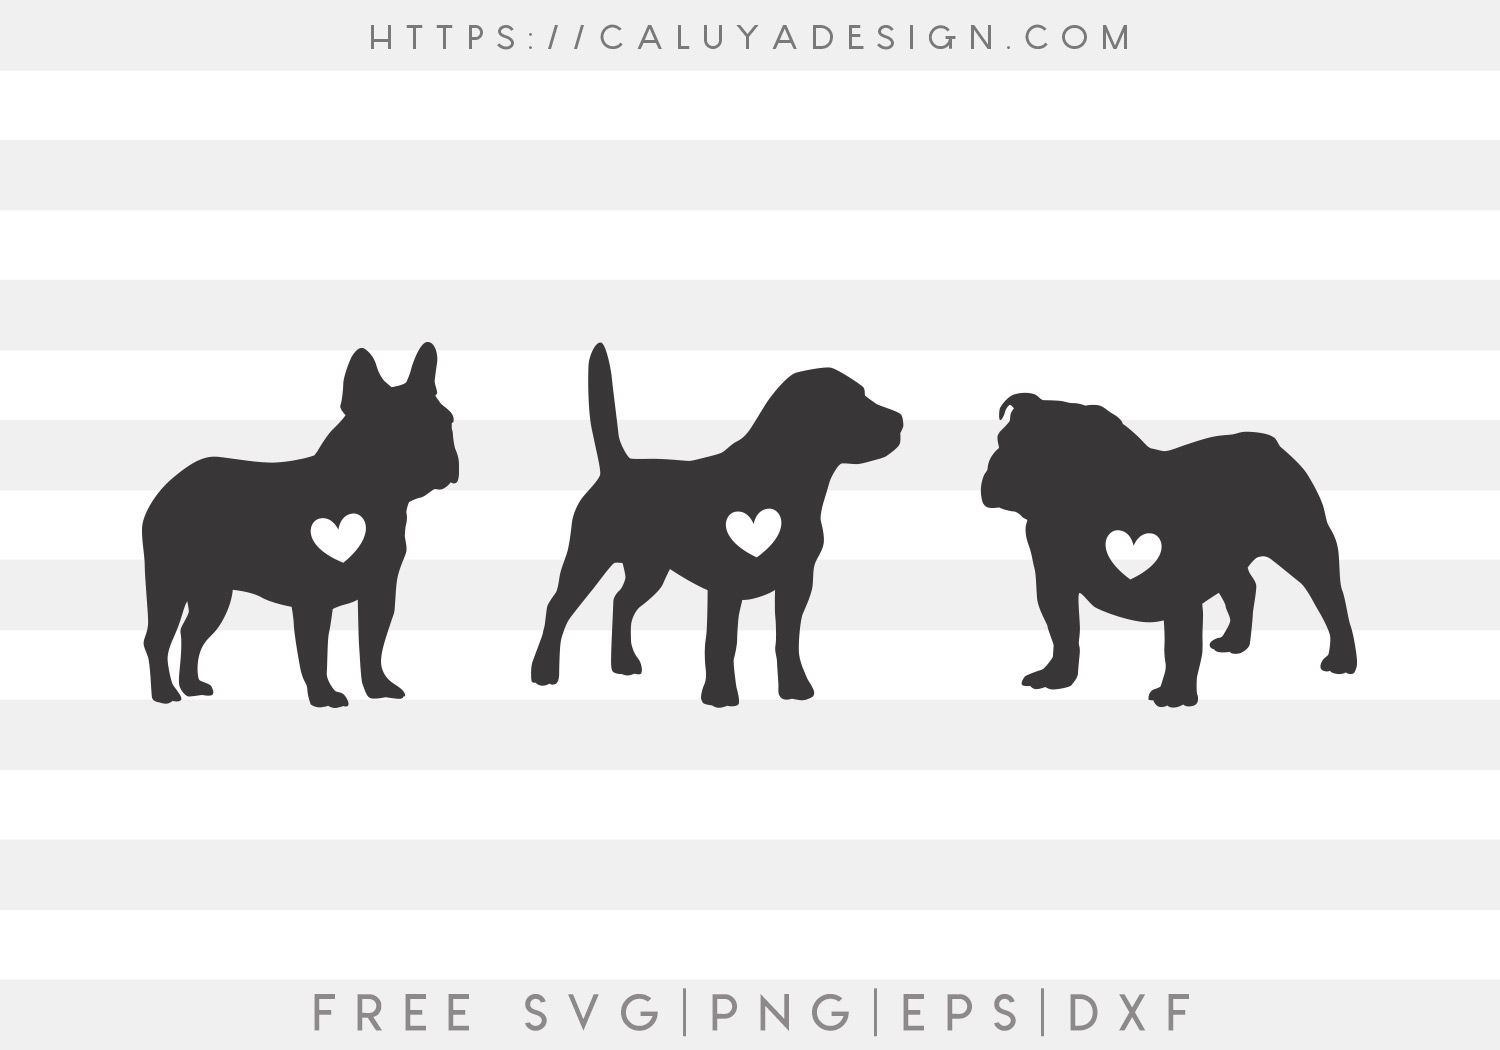 Download Free Small Dog Silhouette With Heart Svg Png Eps Dxf